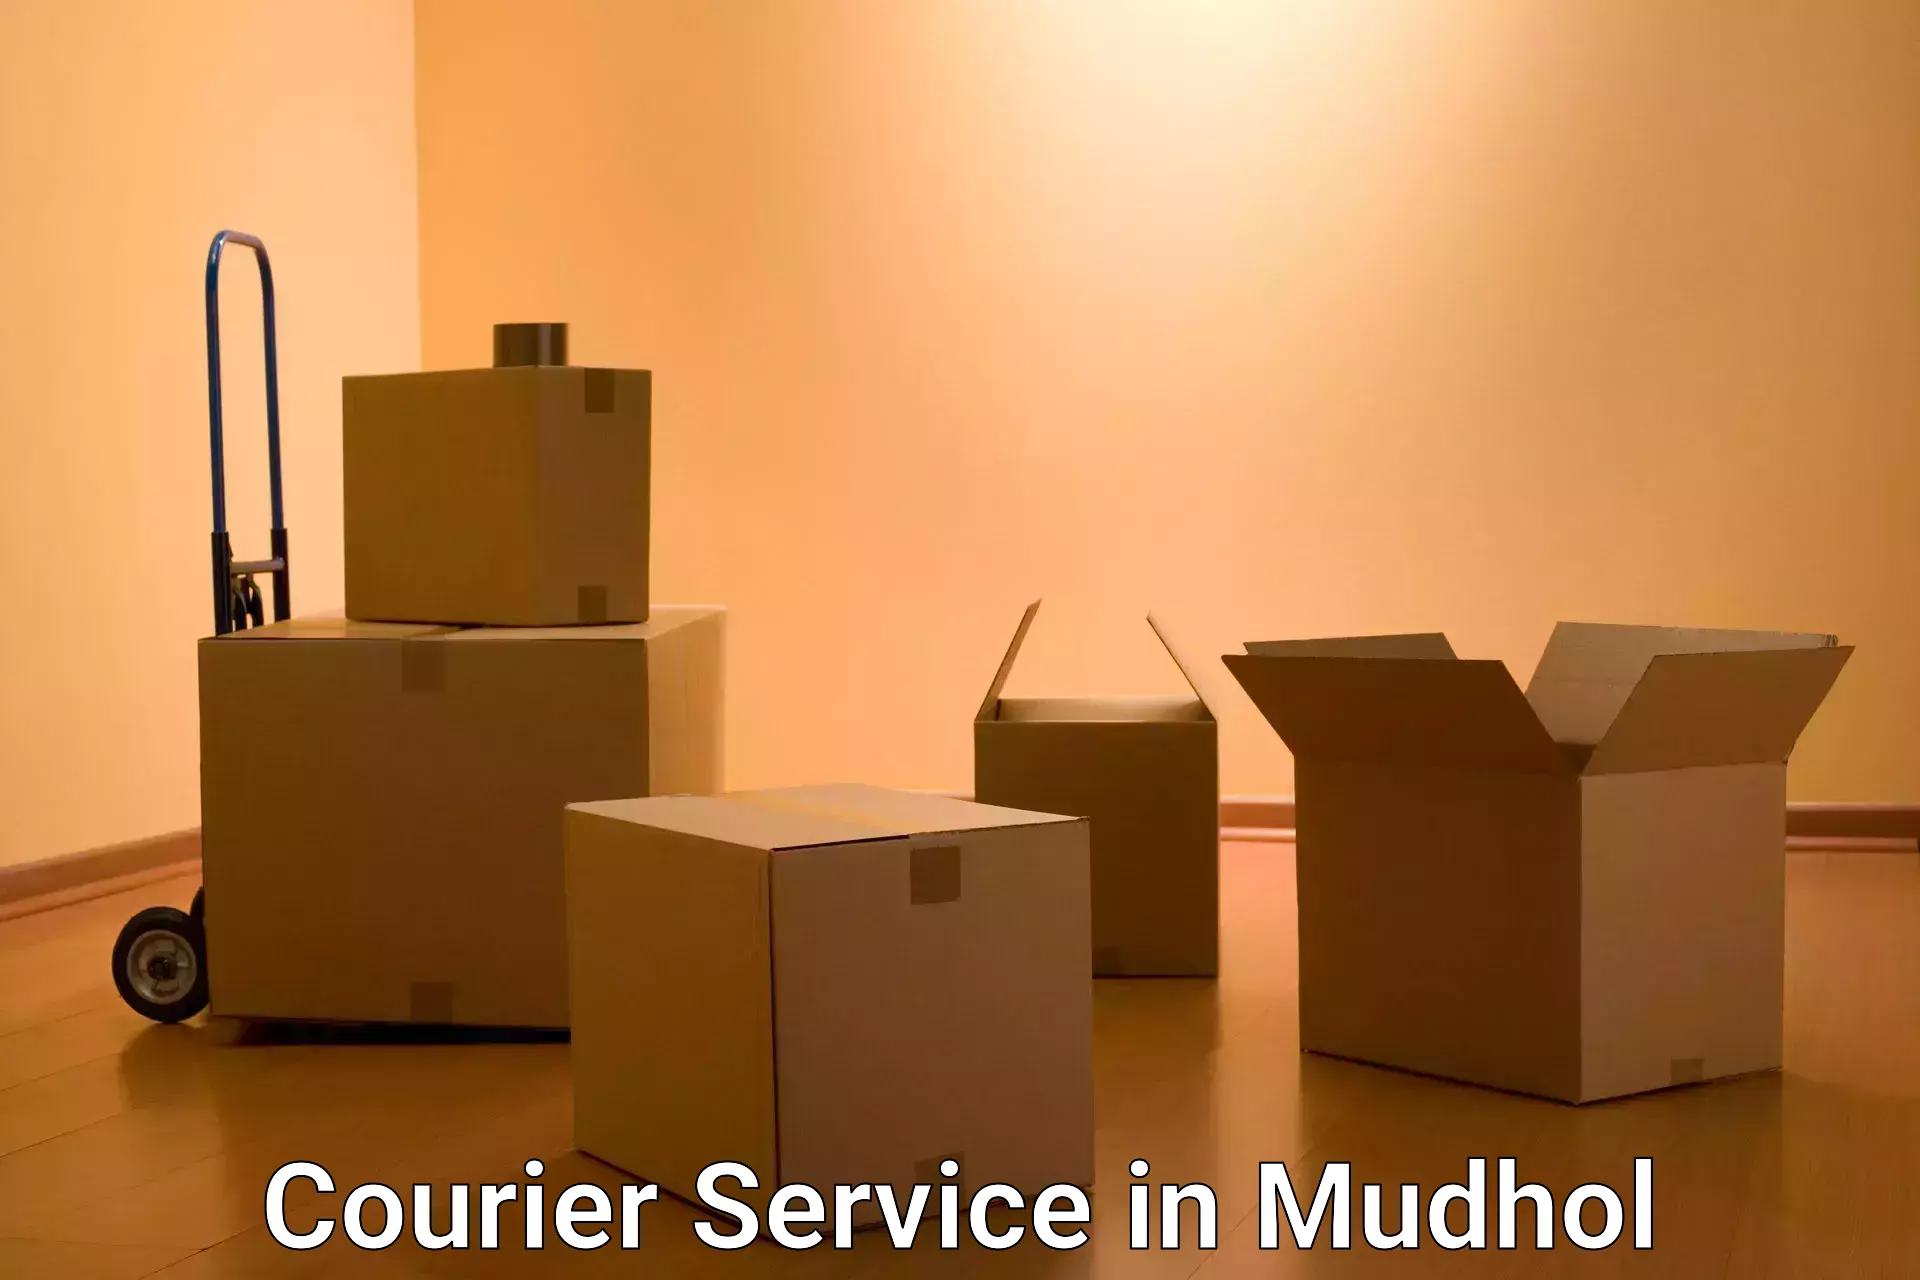 Courier service partnerships in Mudhol